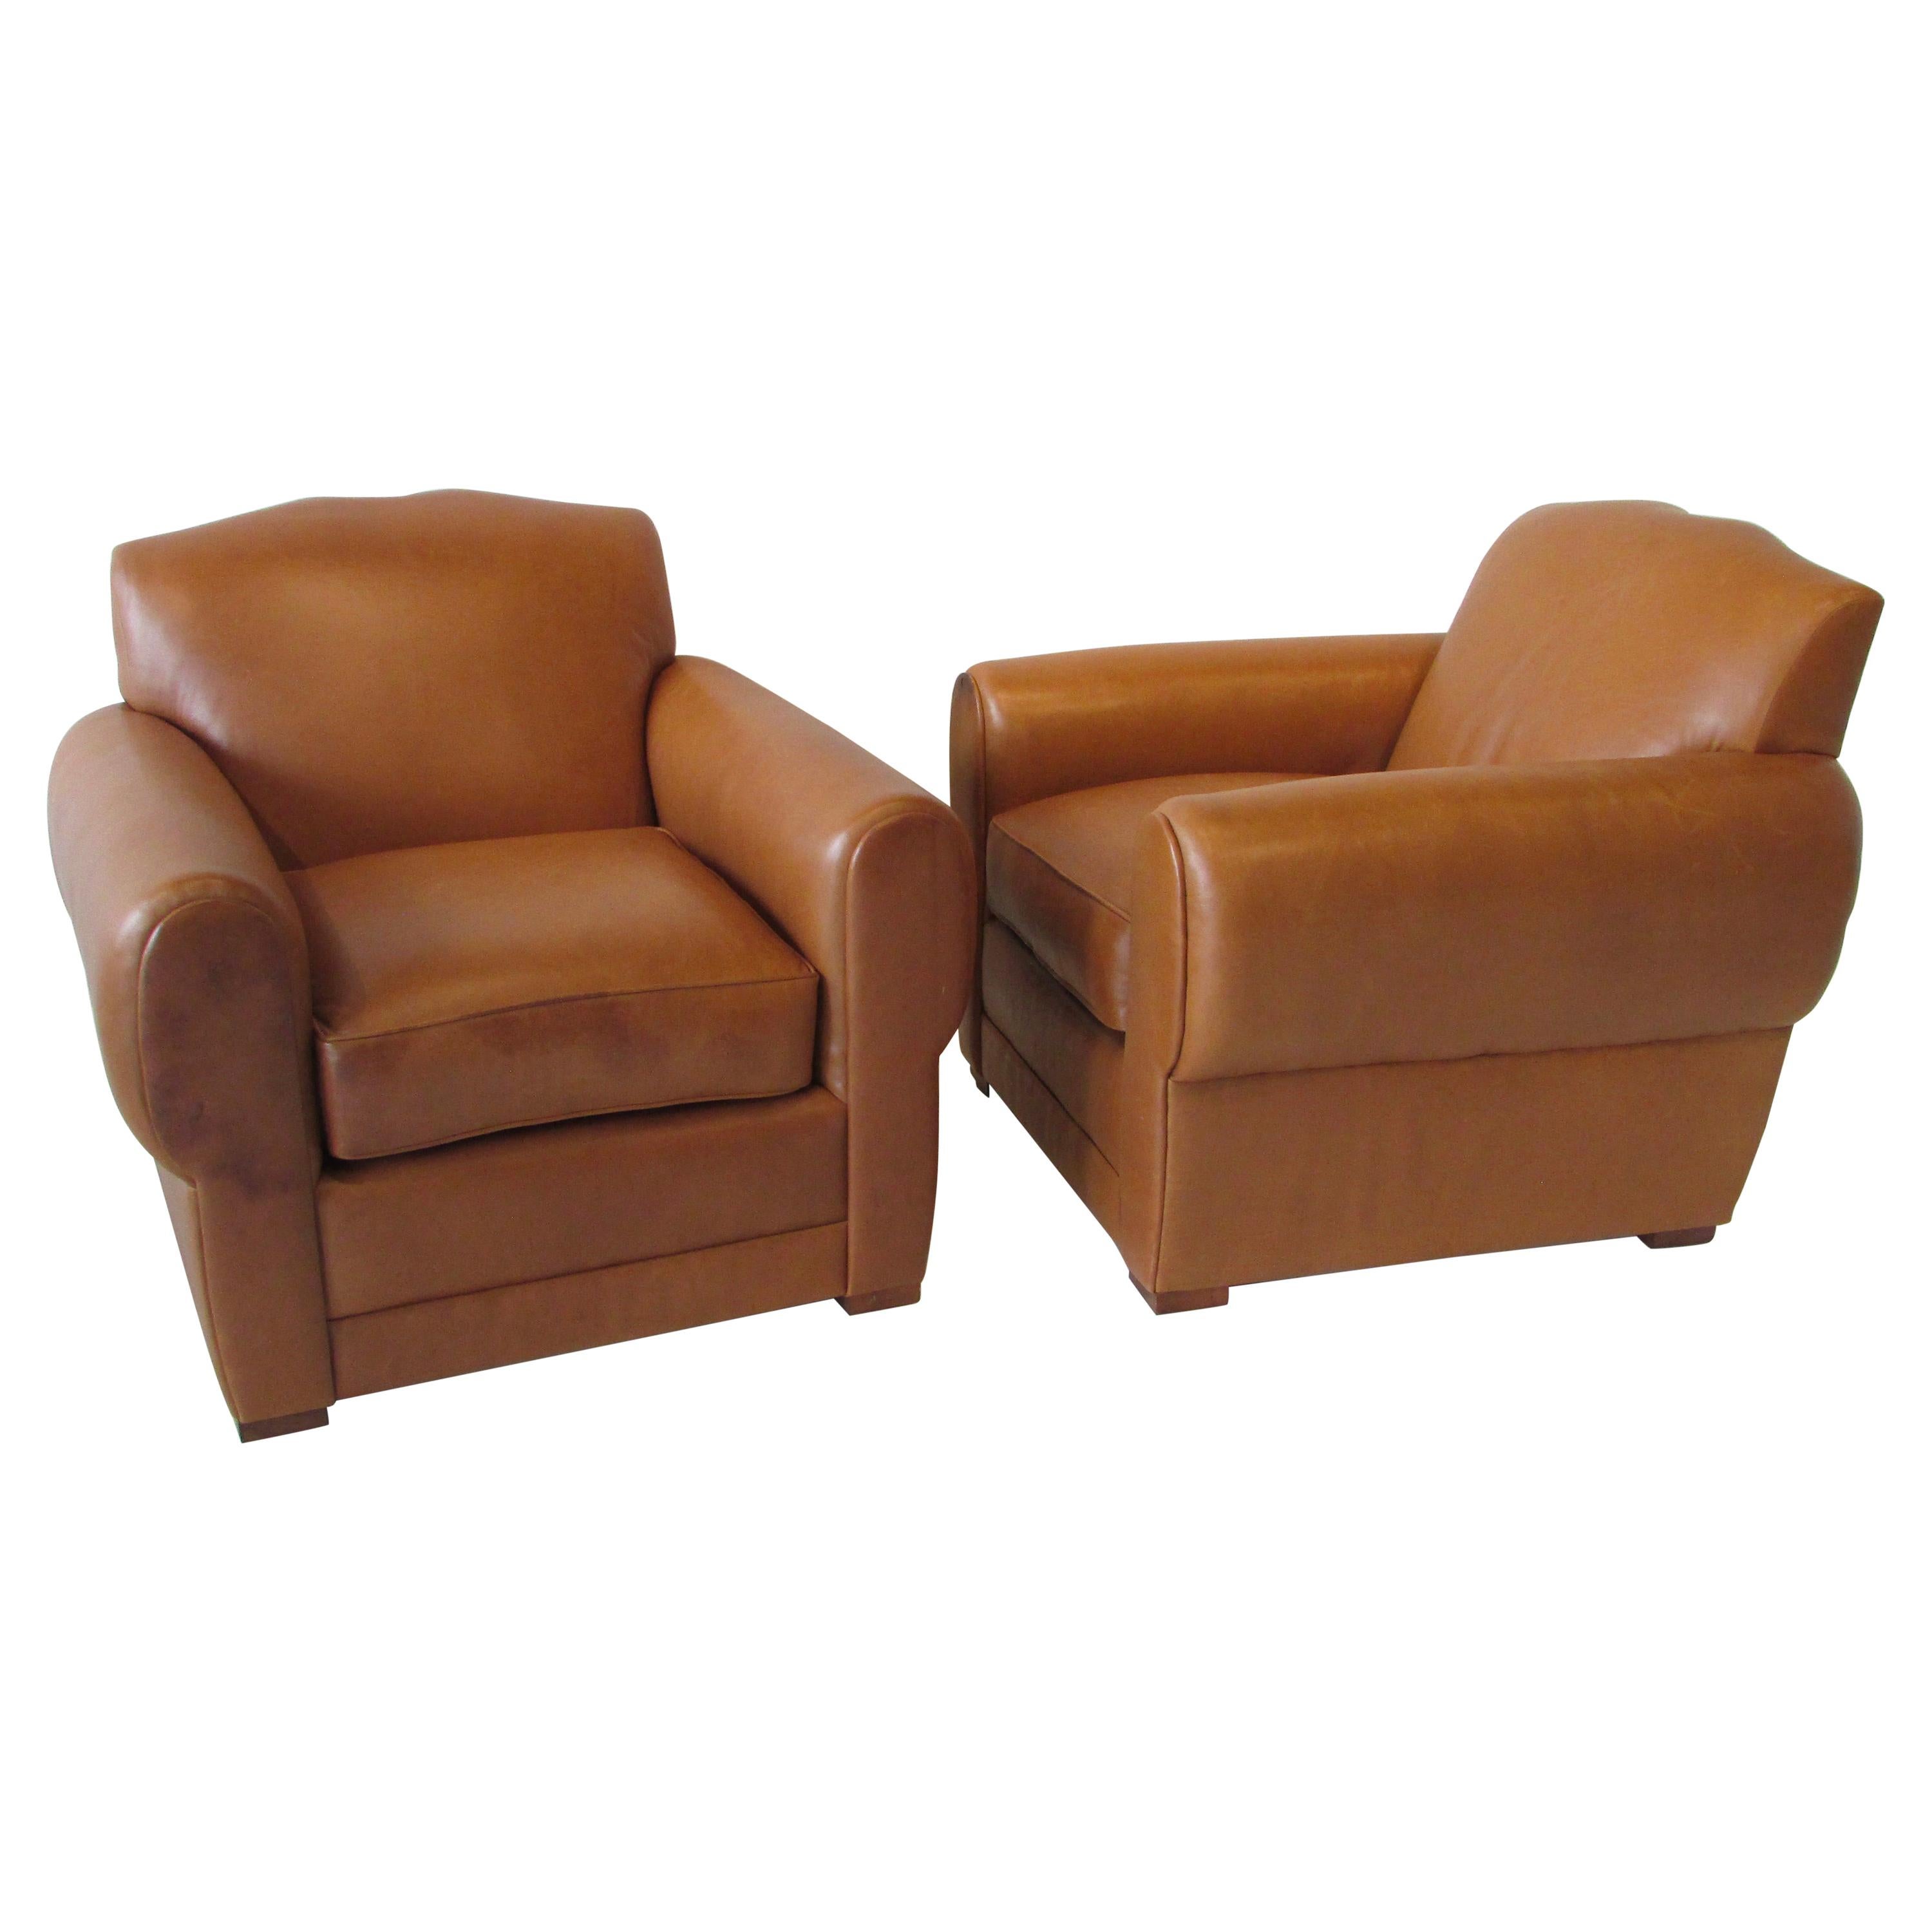 Pair of Ralph Lauren for Henredon French Art Deco Style Leather Club Chairs